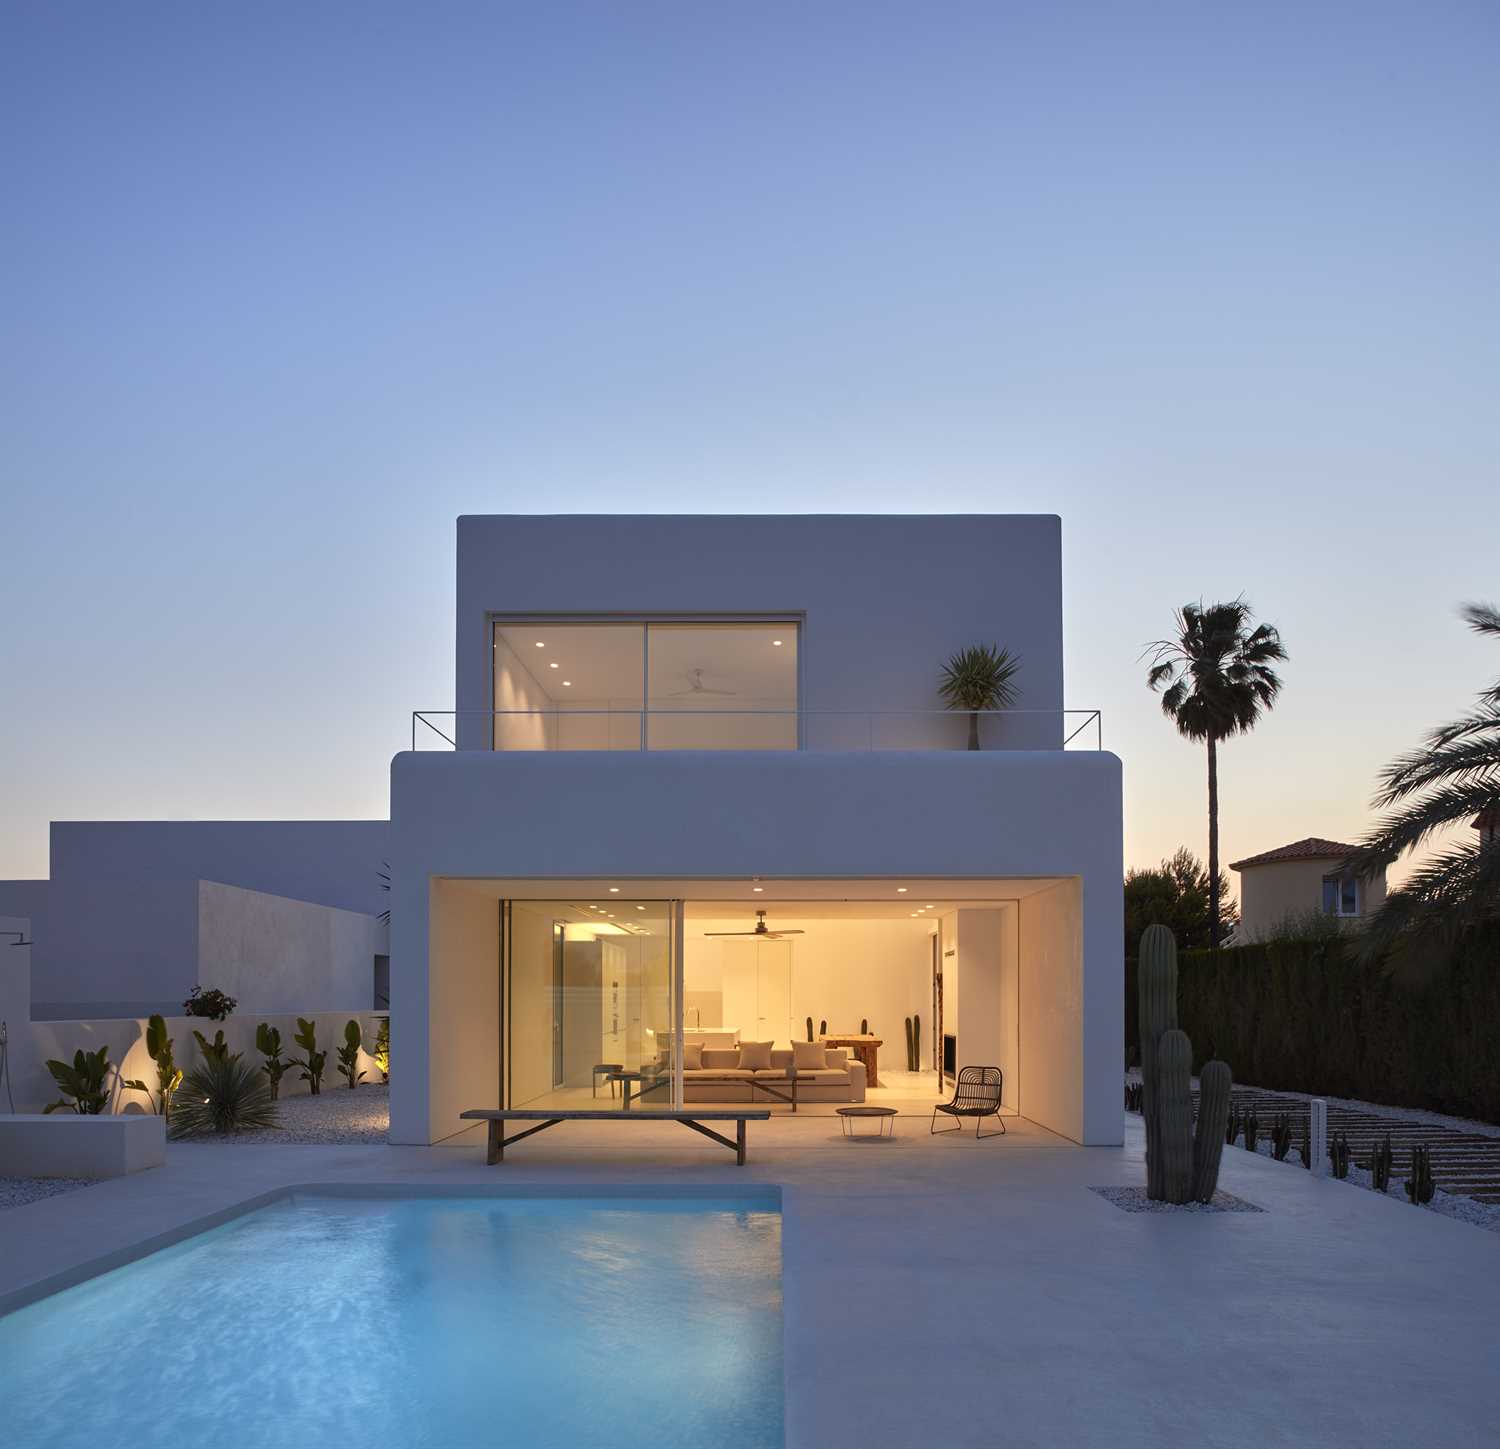 White microcement on facade and pool of modern house.